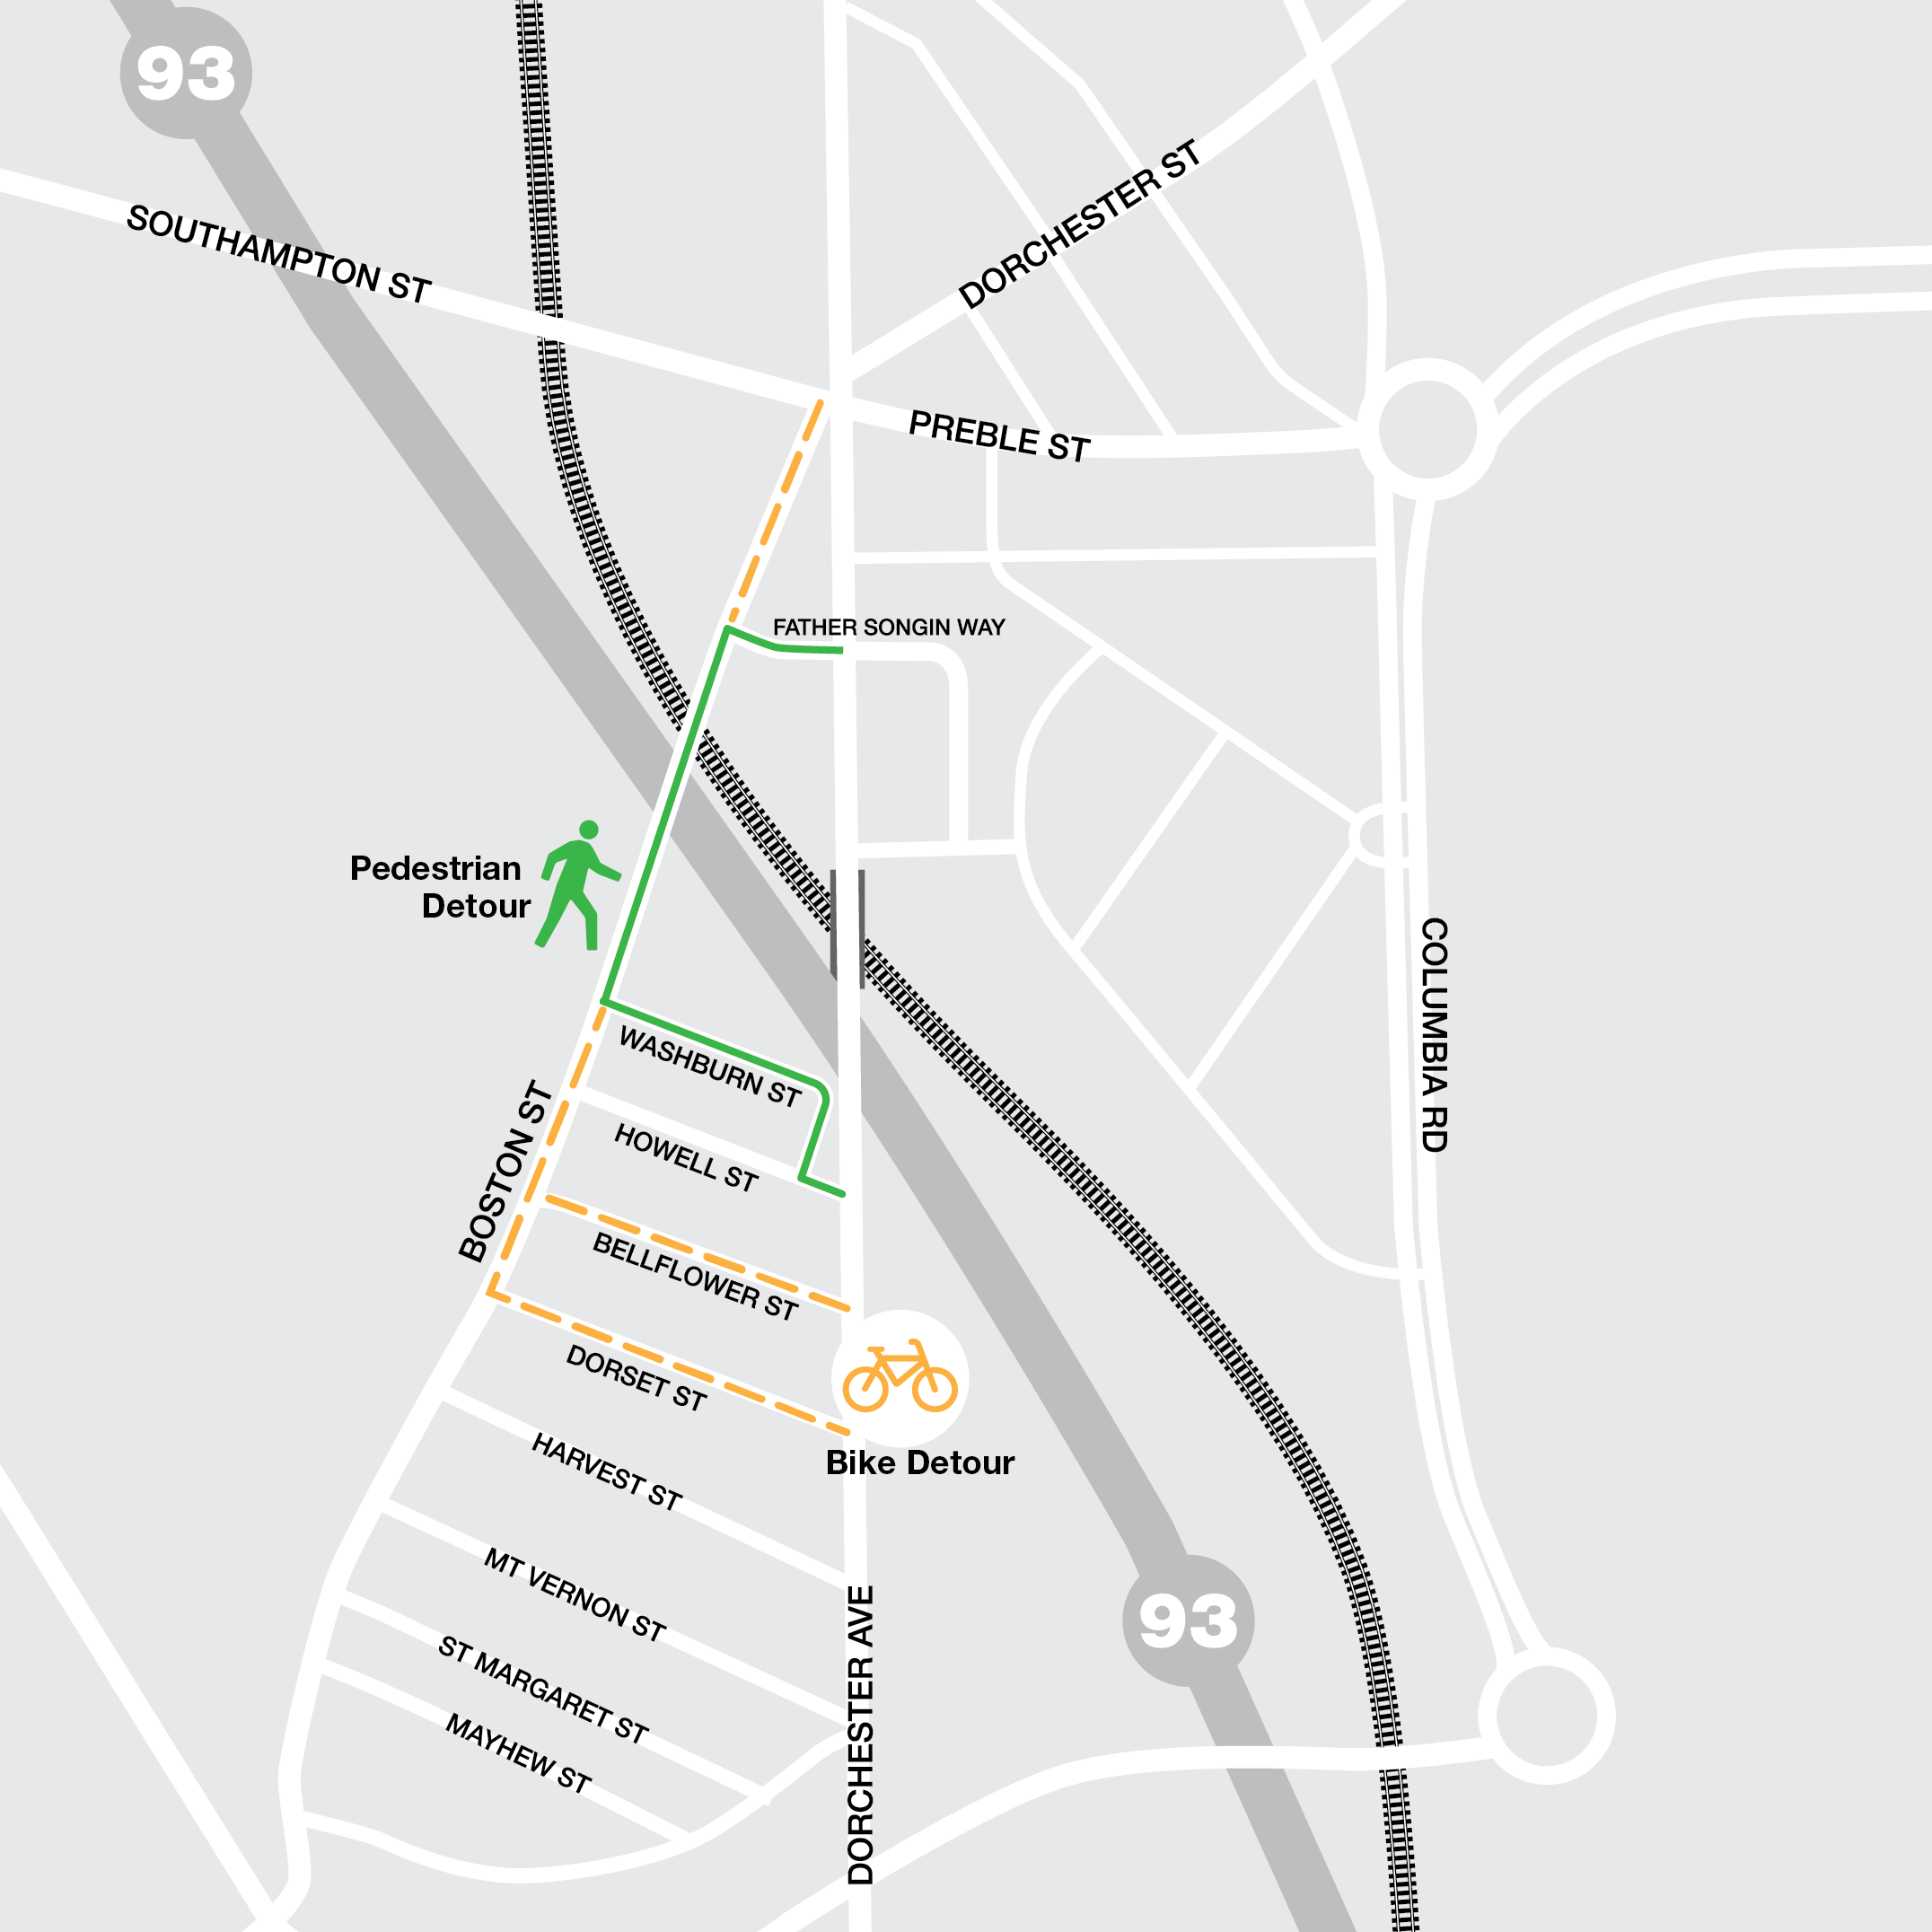 This map shows the pedestrian detour in green. It begins at Father Songin Way and Dorchester Avenue, turns left on Boston Street, and left again on Washburn Street, which curves around to Howell St. A left on Howell ends up at Dorchester Ave below the bridge closure. The Bike detour in gold starts at Southampton and Dorchester, then goes down Boston St to Bellflower St or Dorset Street, both of which meet up with Dorchester Avenue below the bridge. 